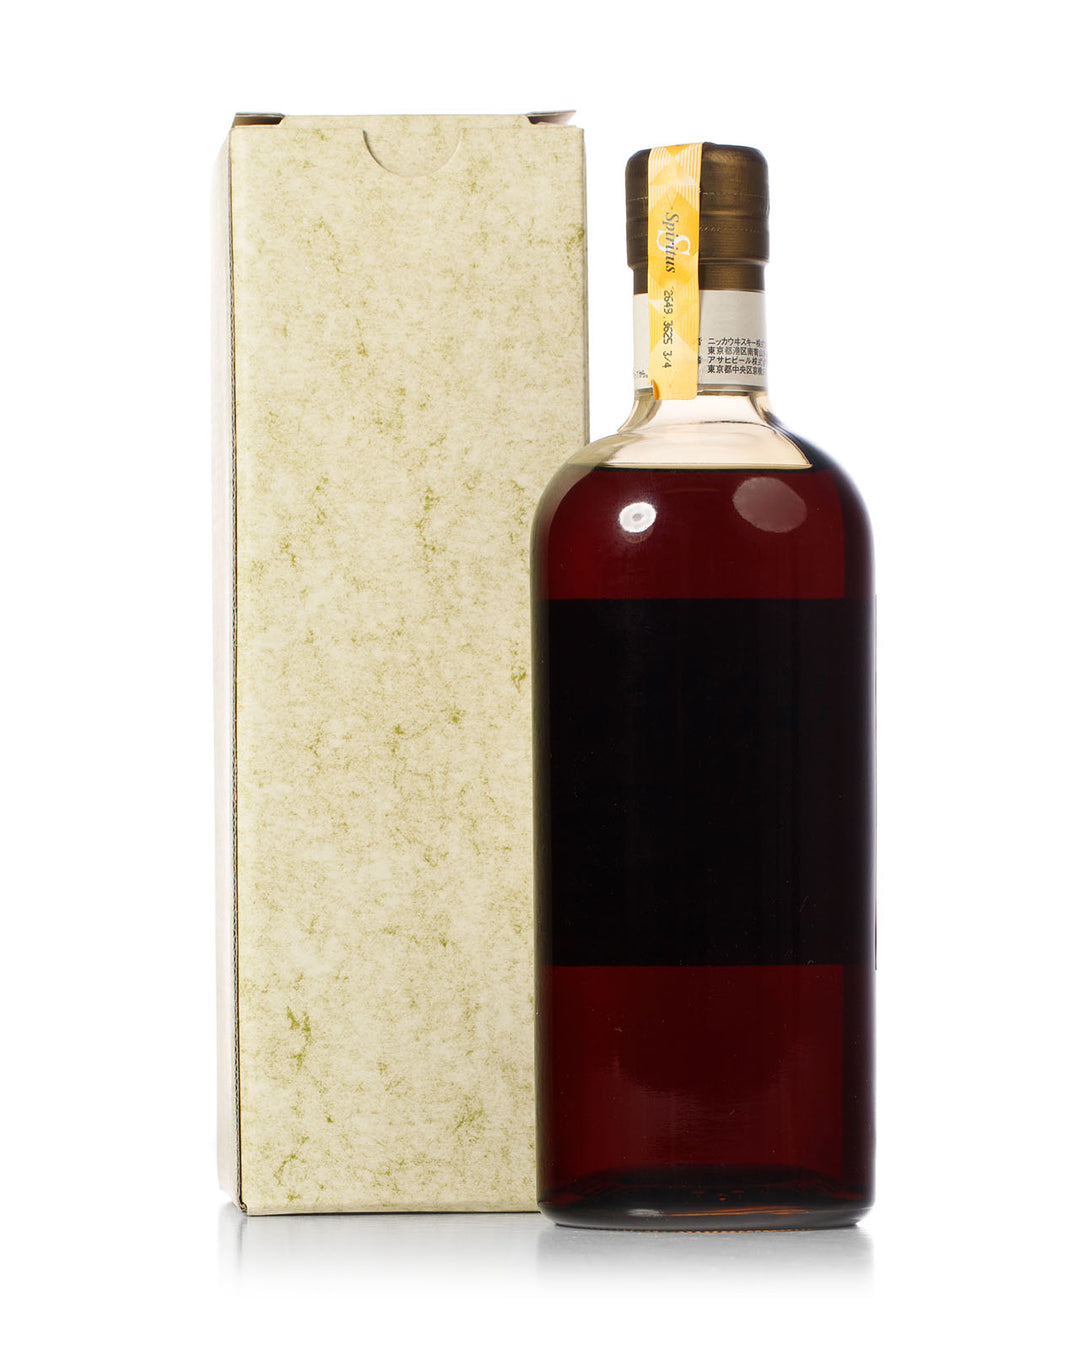 Nikka 1987 17 Year Old Single Cask Warehouse #4 Bottled 2005 Cask No. 89698 With Original Box